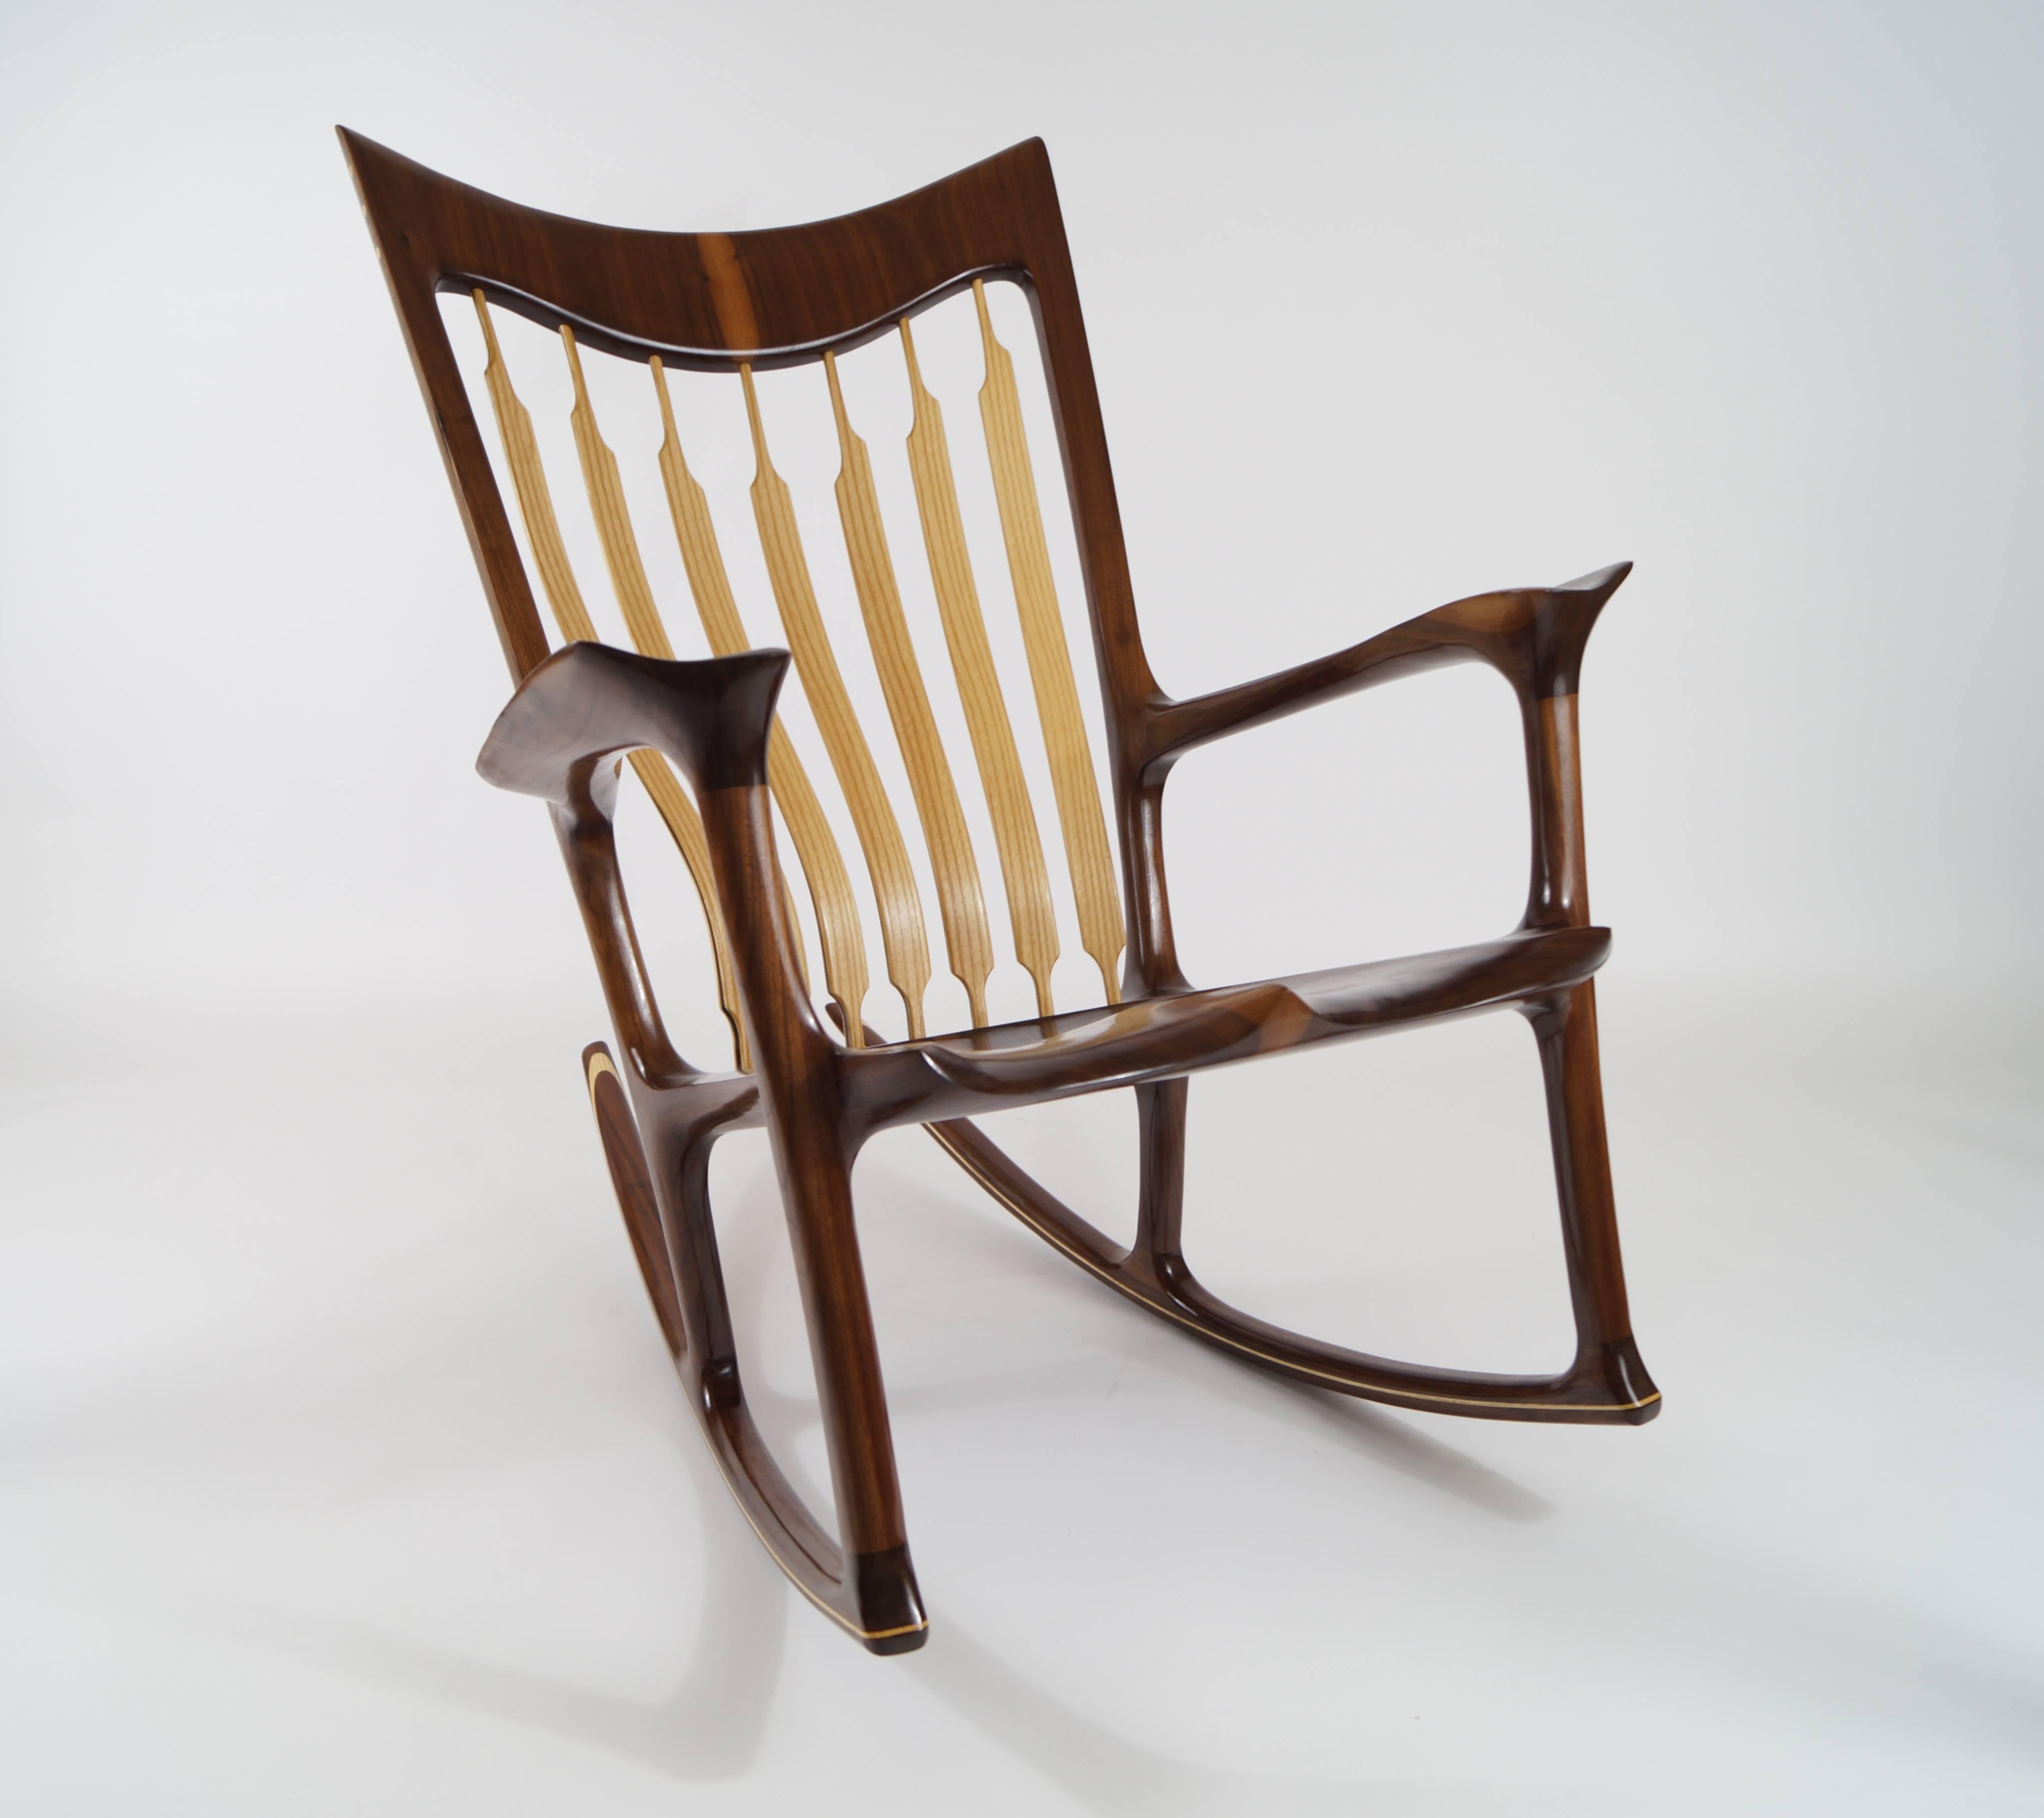 Contemporary Rocking Chair, Handcrafted and Designed by Morten Stenbaek